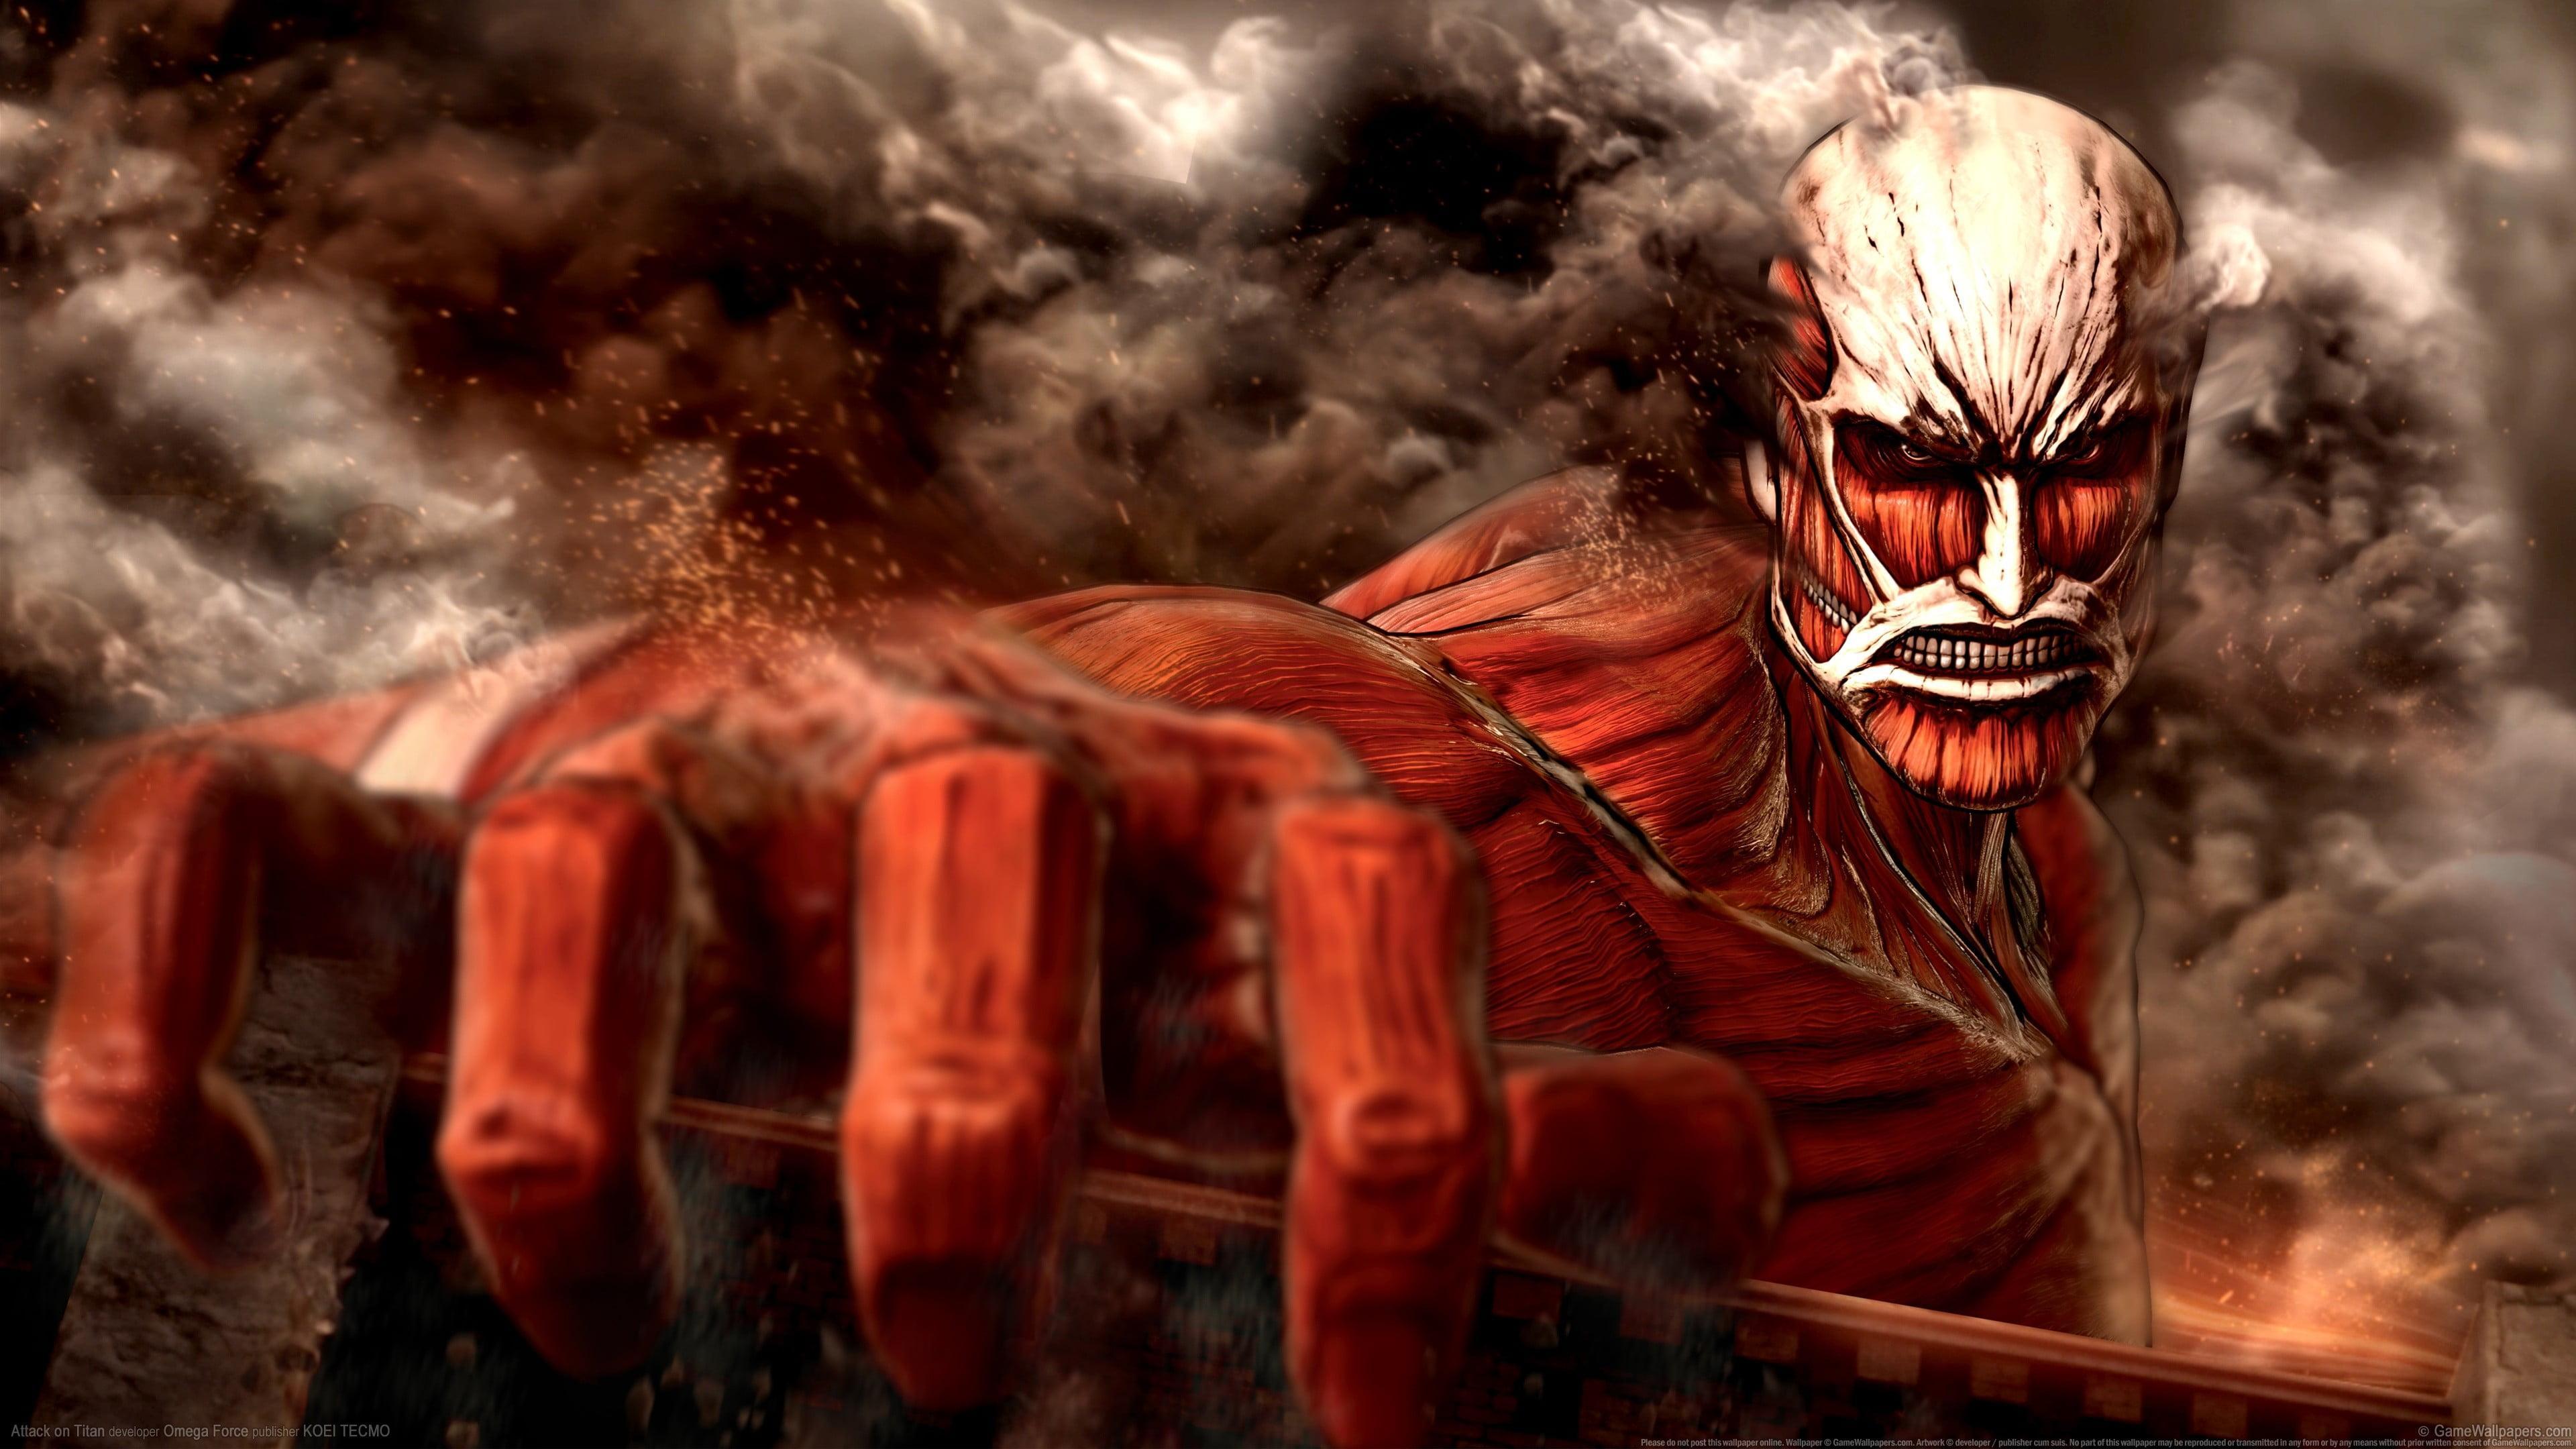 Wallpaper Attack On Titan HD, image collections of wallpaper